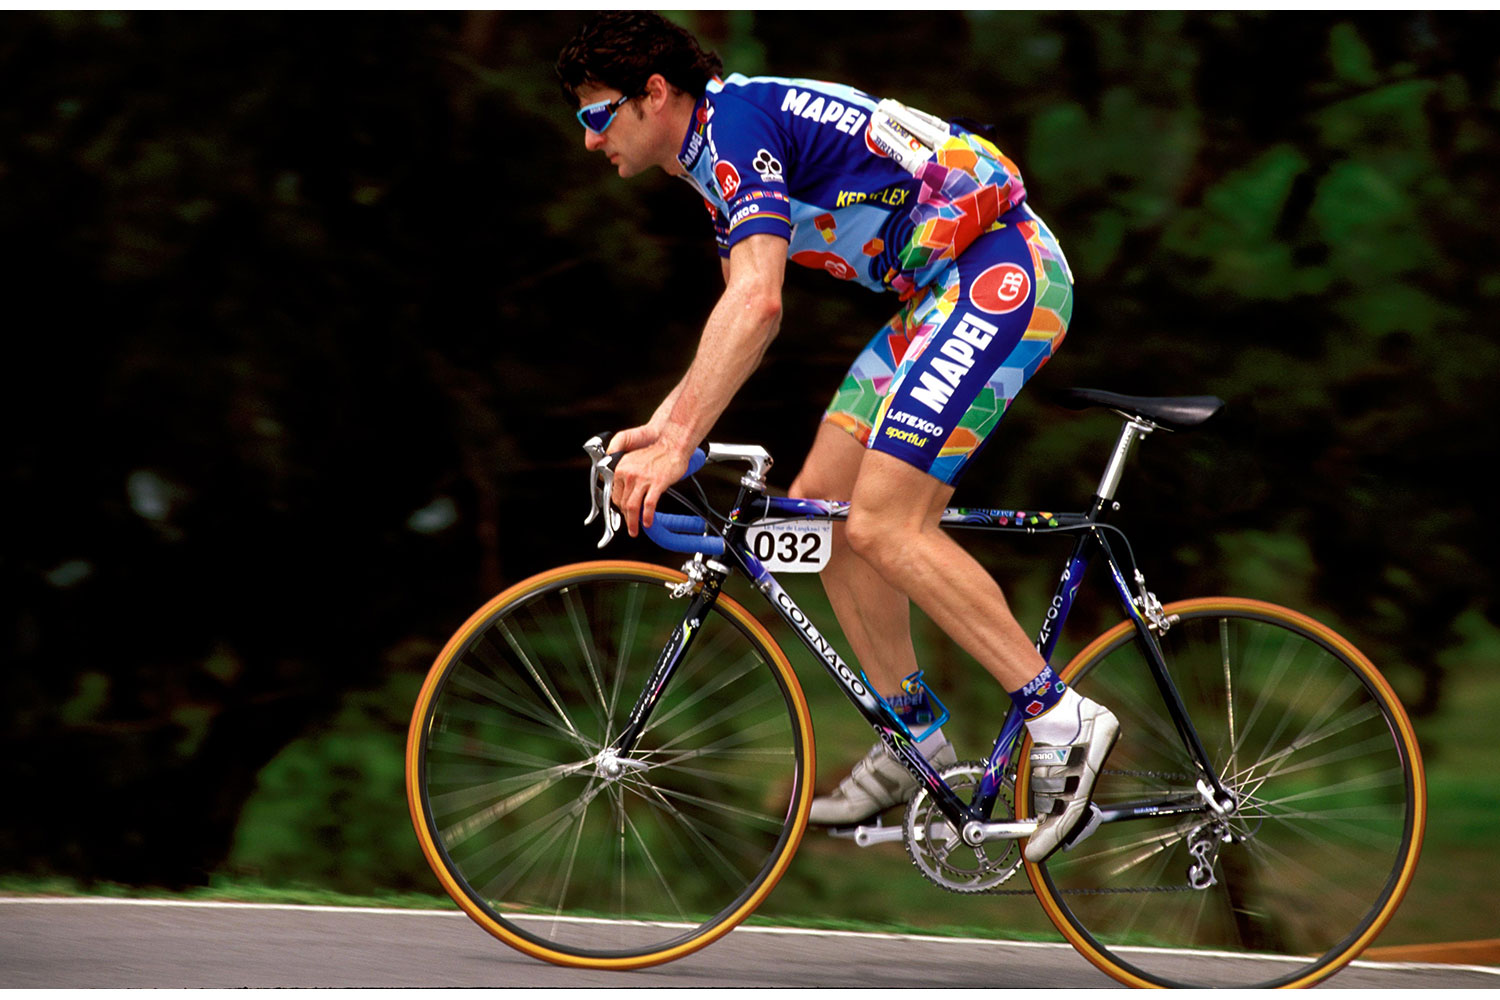 Gianni Bugno in action at the Tour de Langkawi, Malaysia.